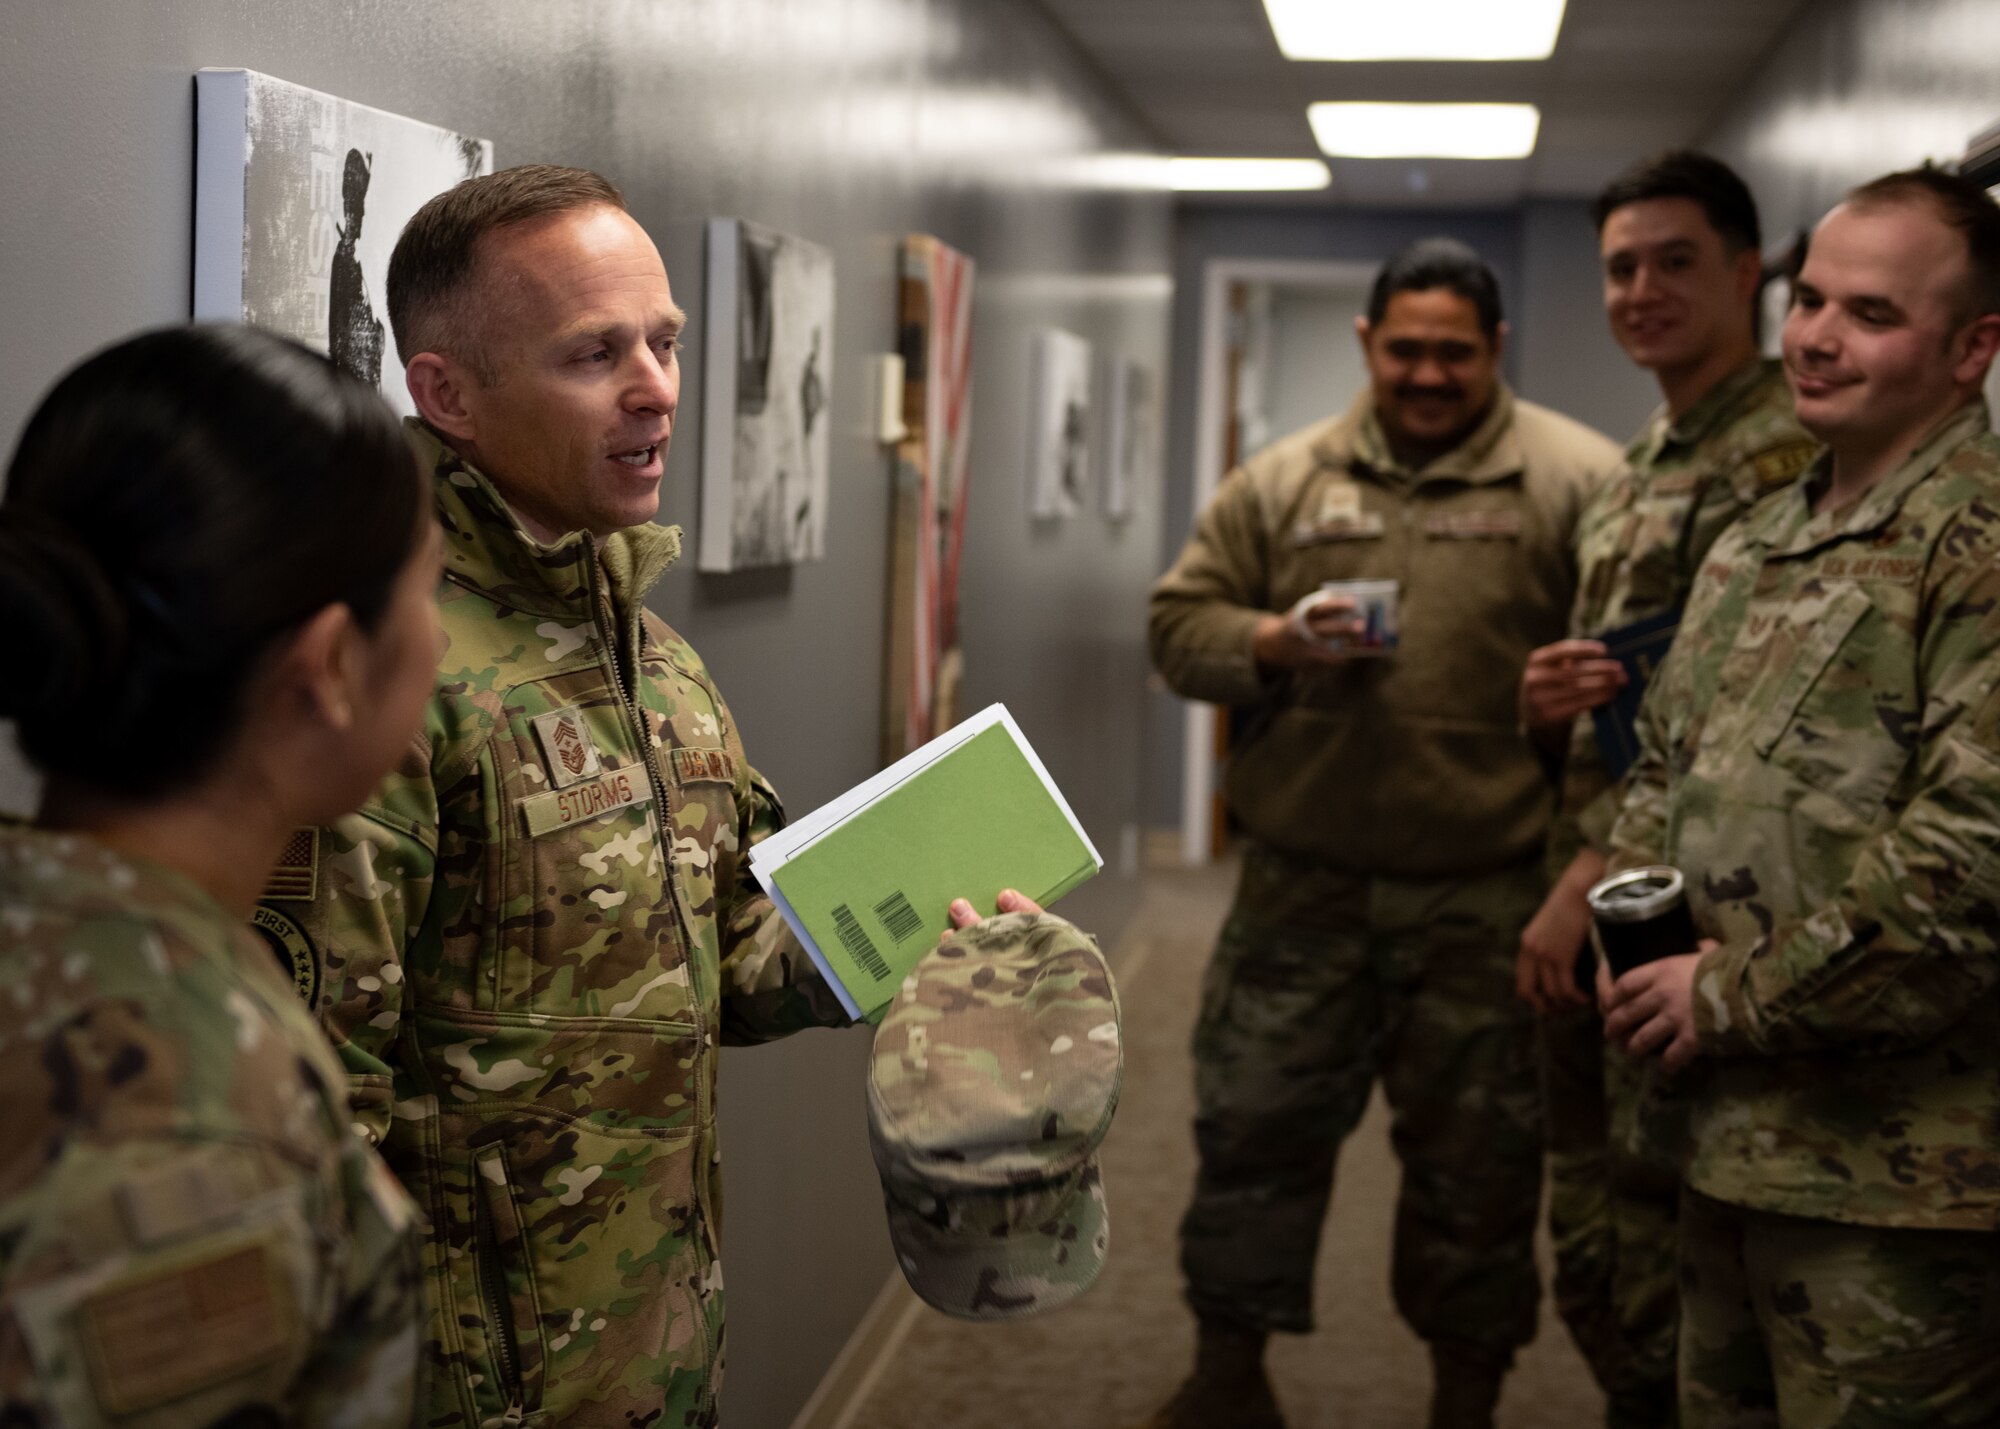 Chief speaks with airmen in a hallway.